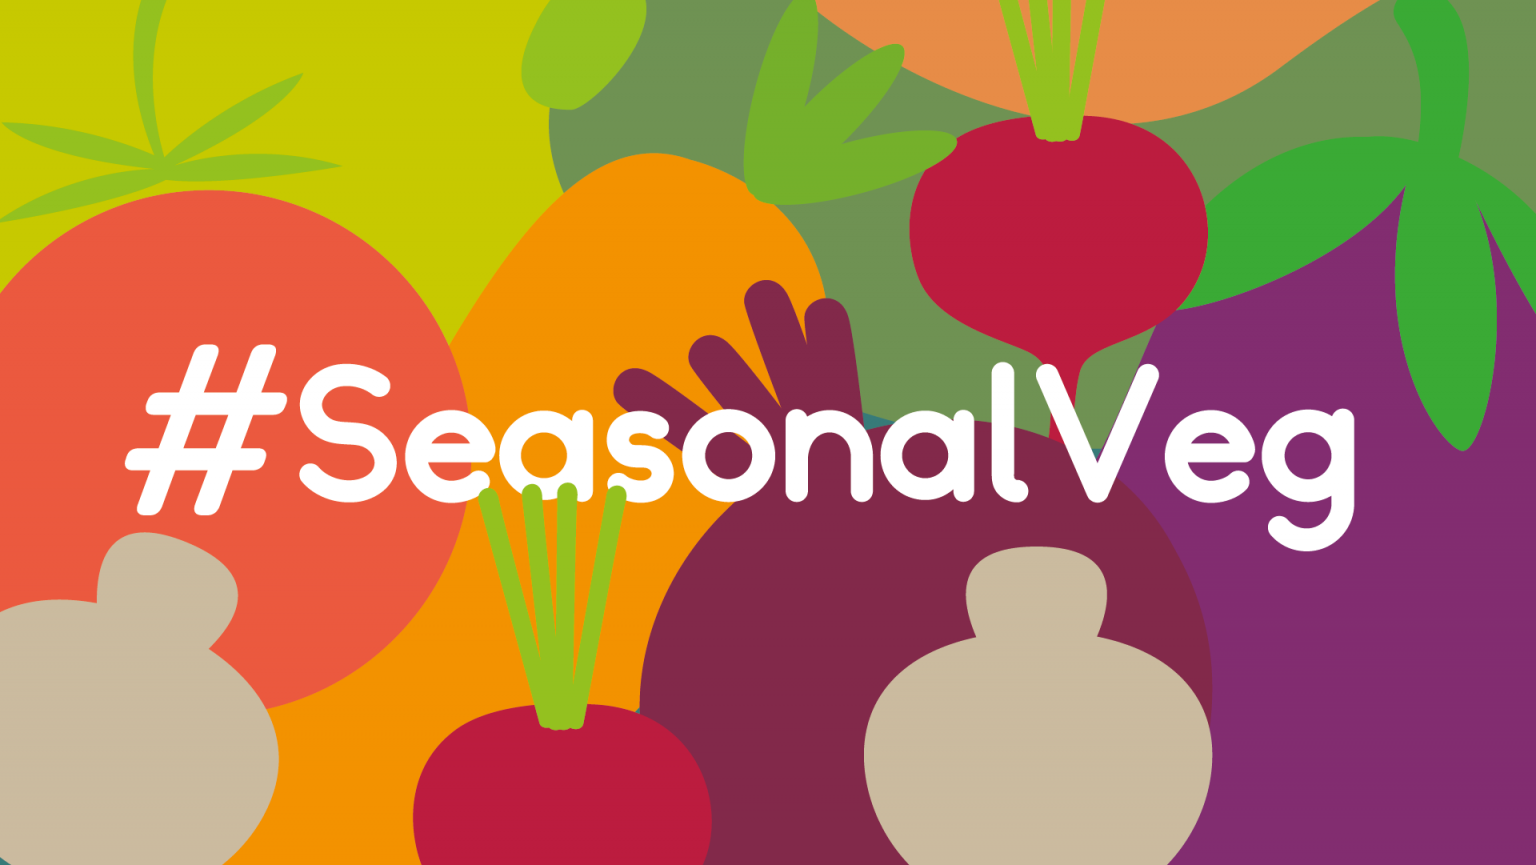 Chefs and Nutritionists Support Campaign to Eat More Seasonal Veg